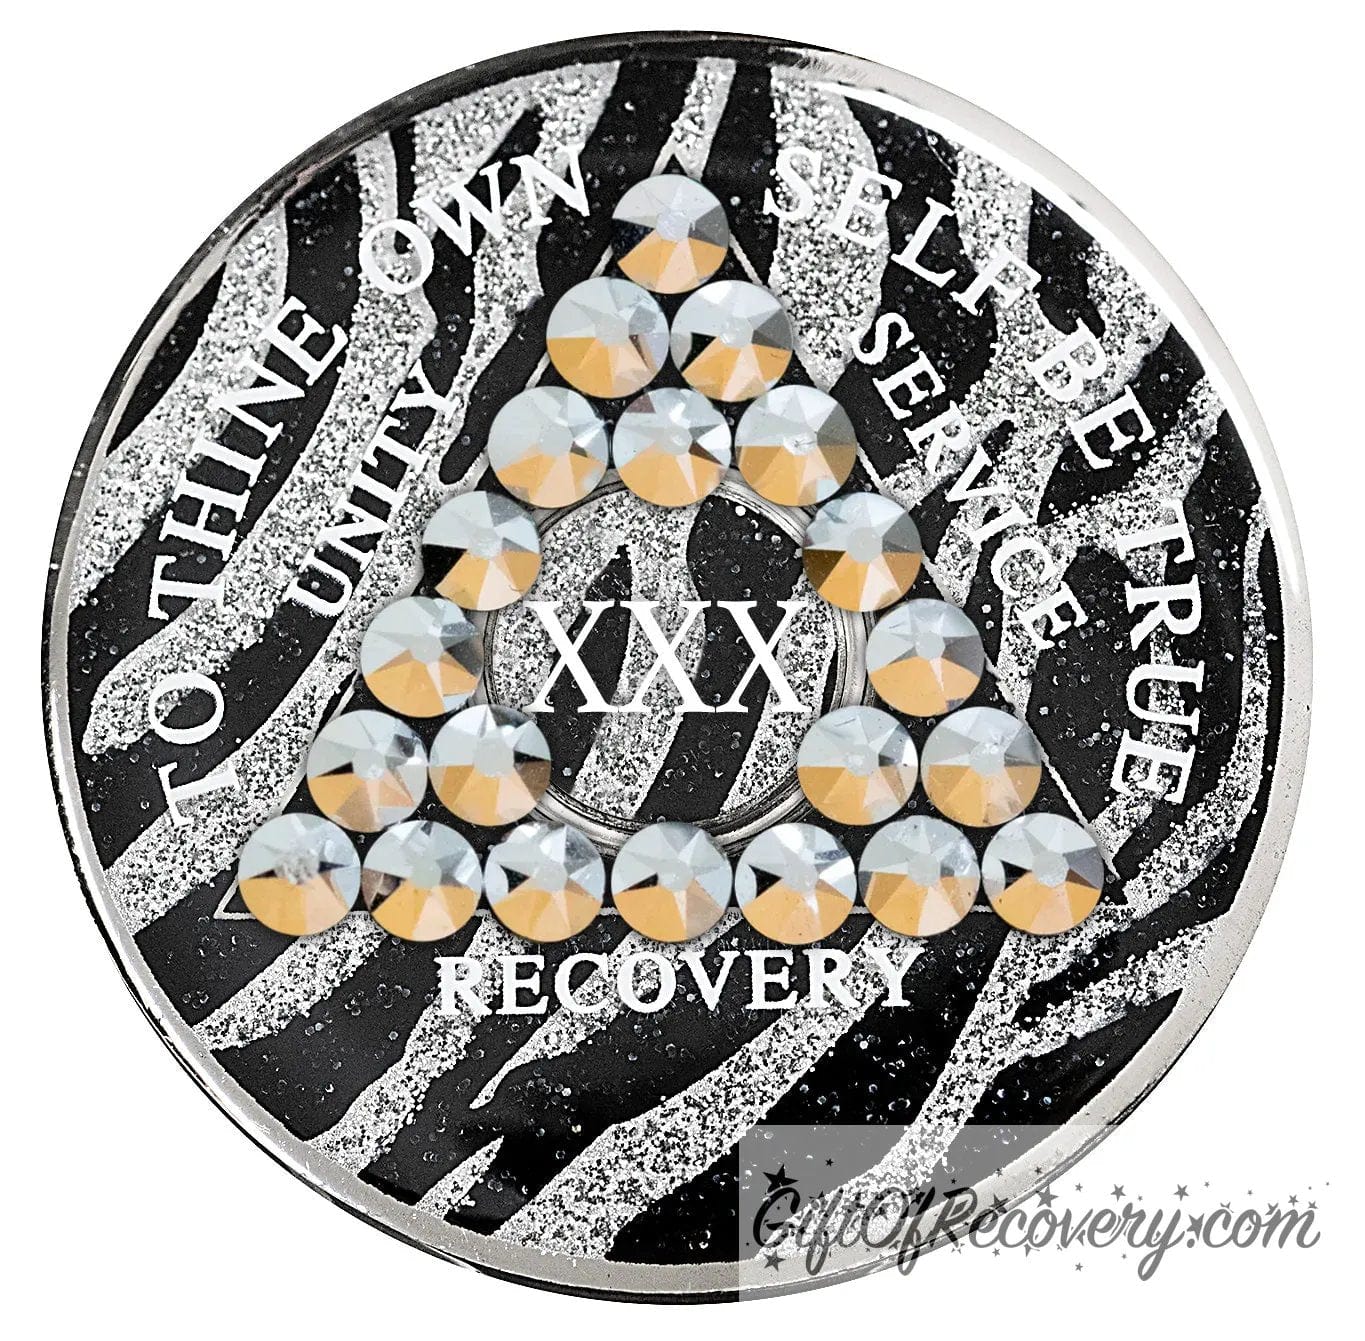 30 Year zebra glitter print, black and silver, AA medallion with 21 genuine comet crystals in a triangle around the year, the lettering unity, service, recovery, the 1 year and To Thine Own Self Be True are in white and the recovery medallion rim is silver.